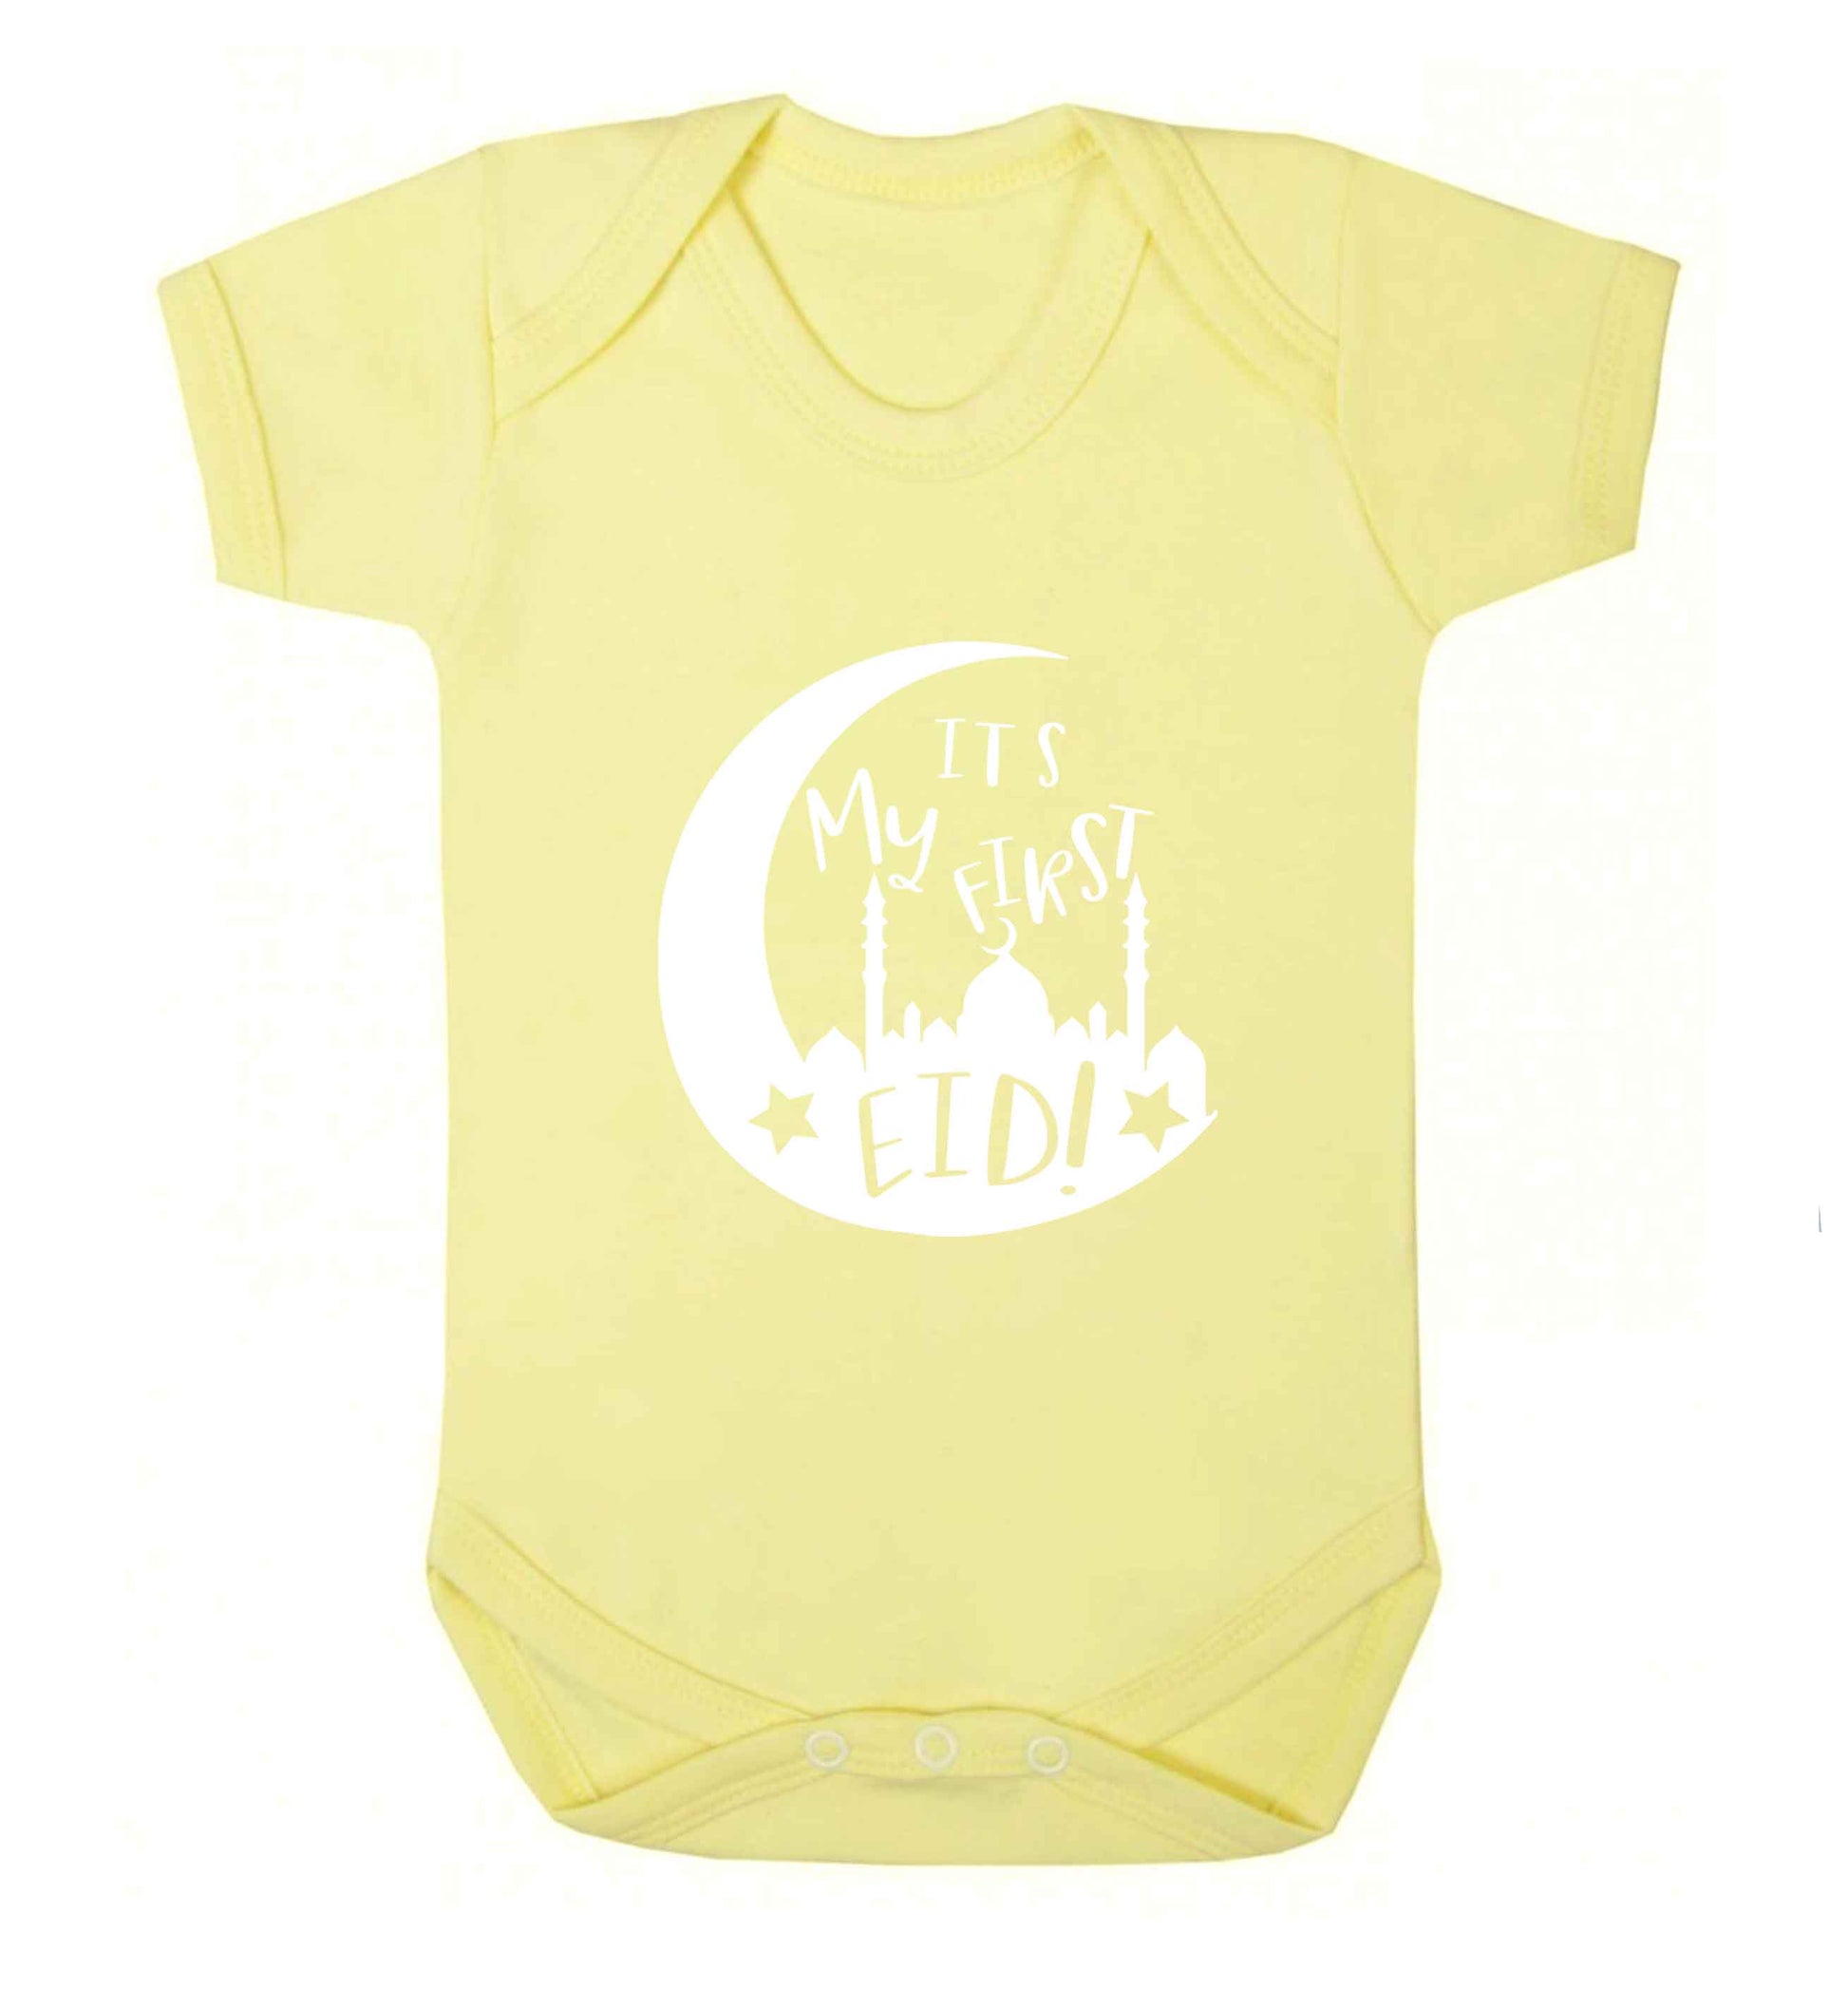 It's my first Eid moon baby vest pale yellow 18-24 months